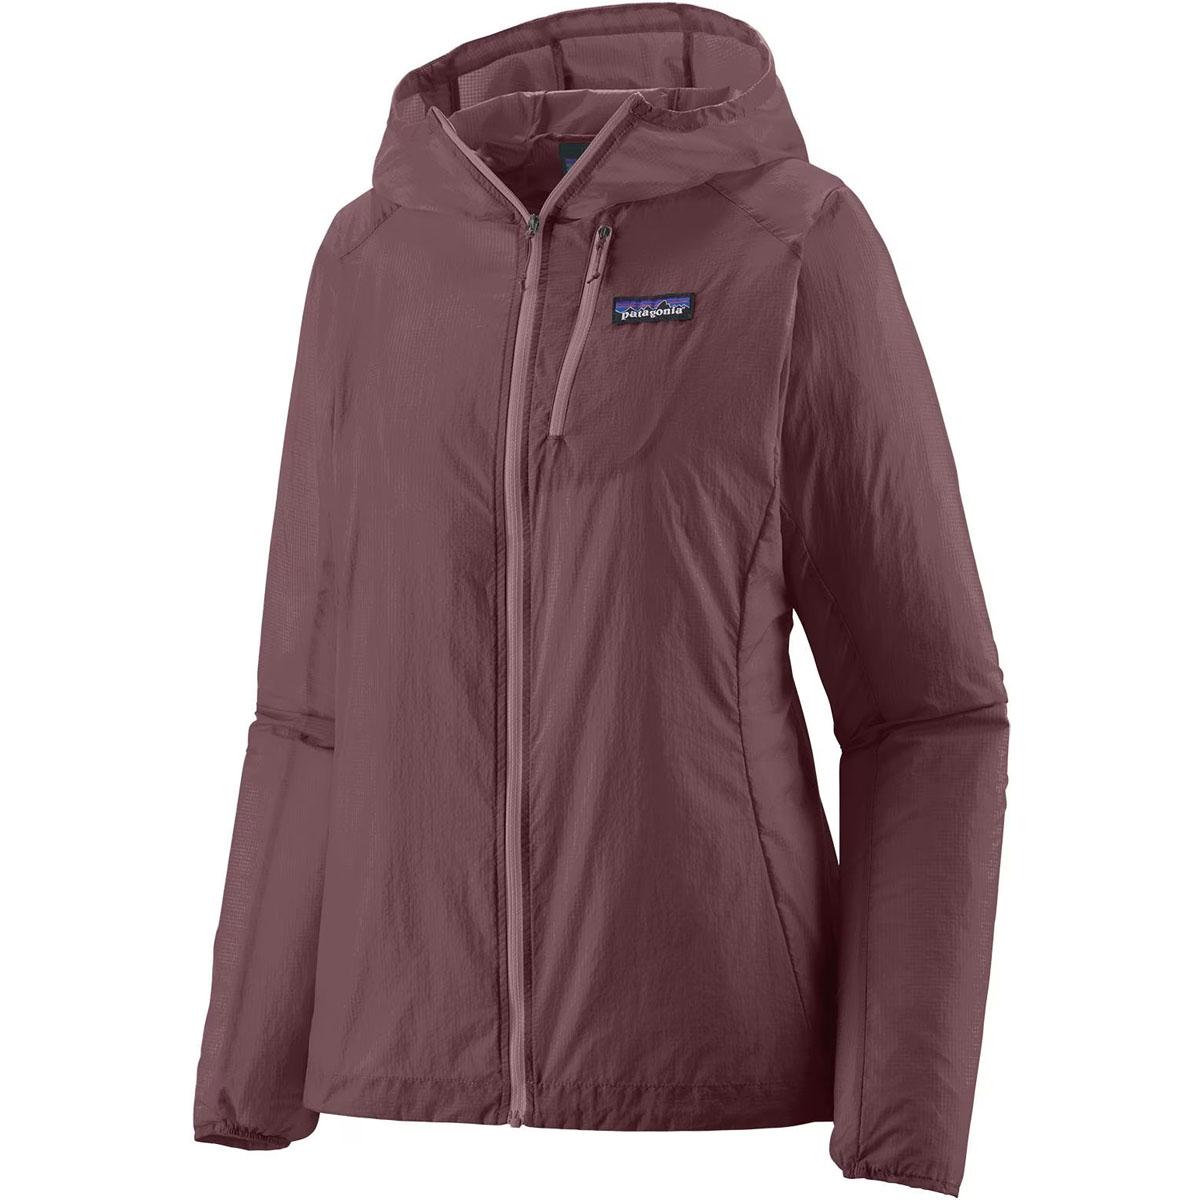 Patagonia Womens Houdini Jacket for $53.83 Shipped